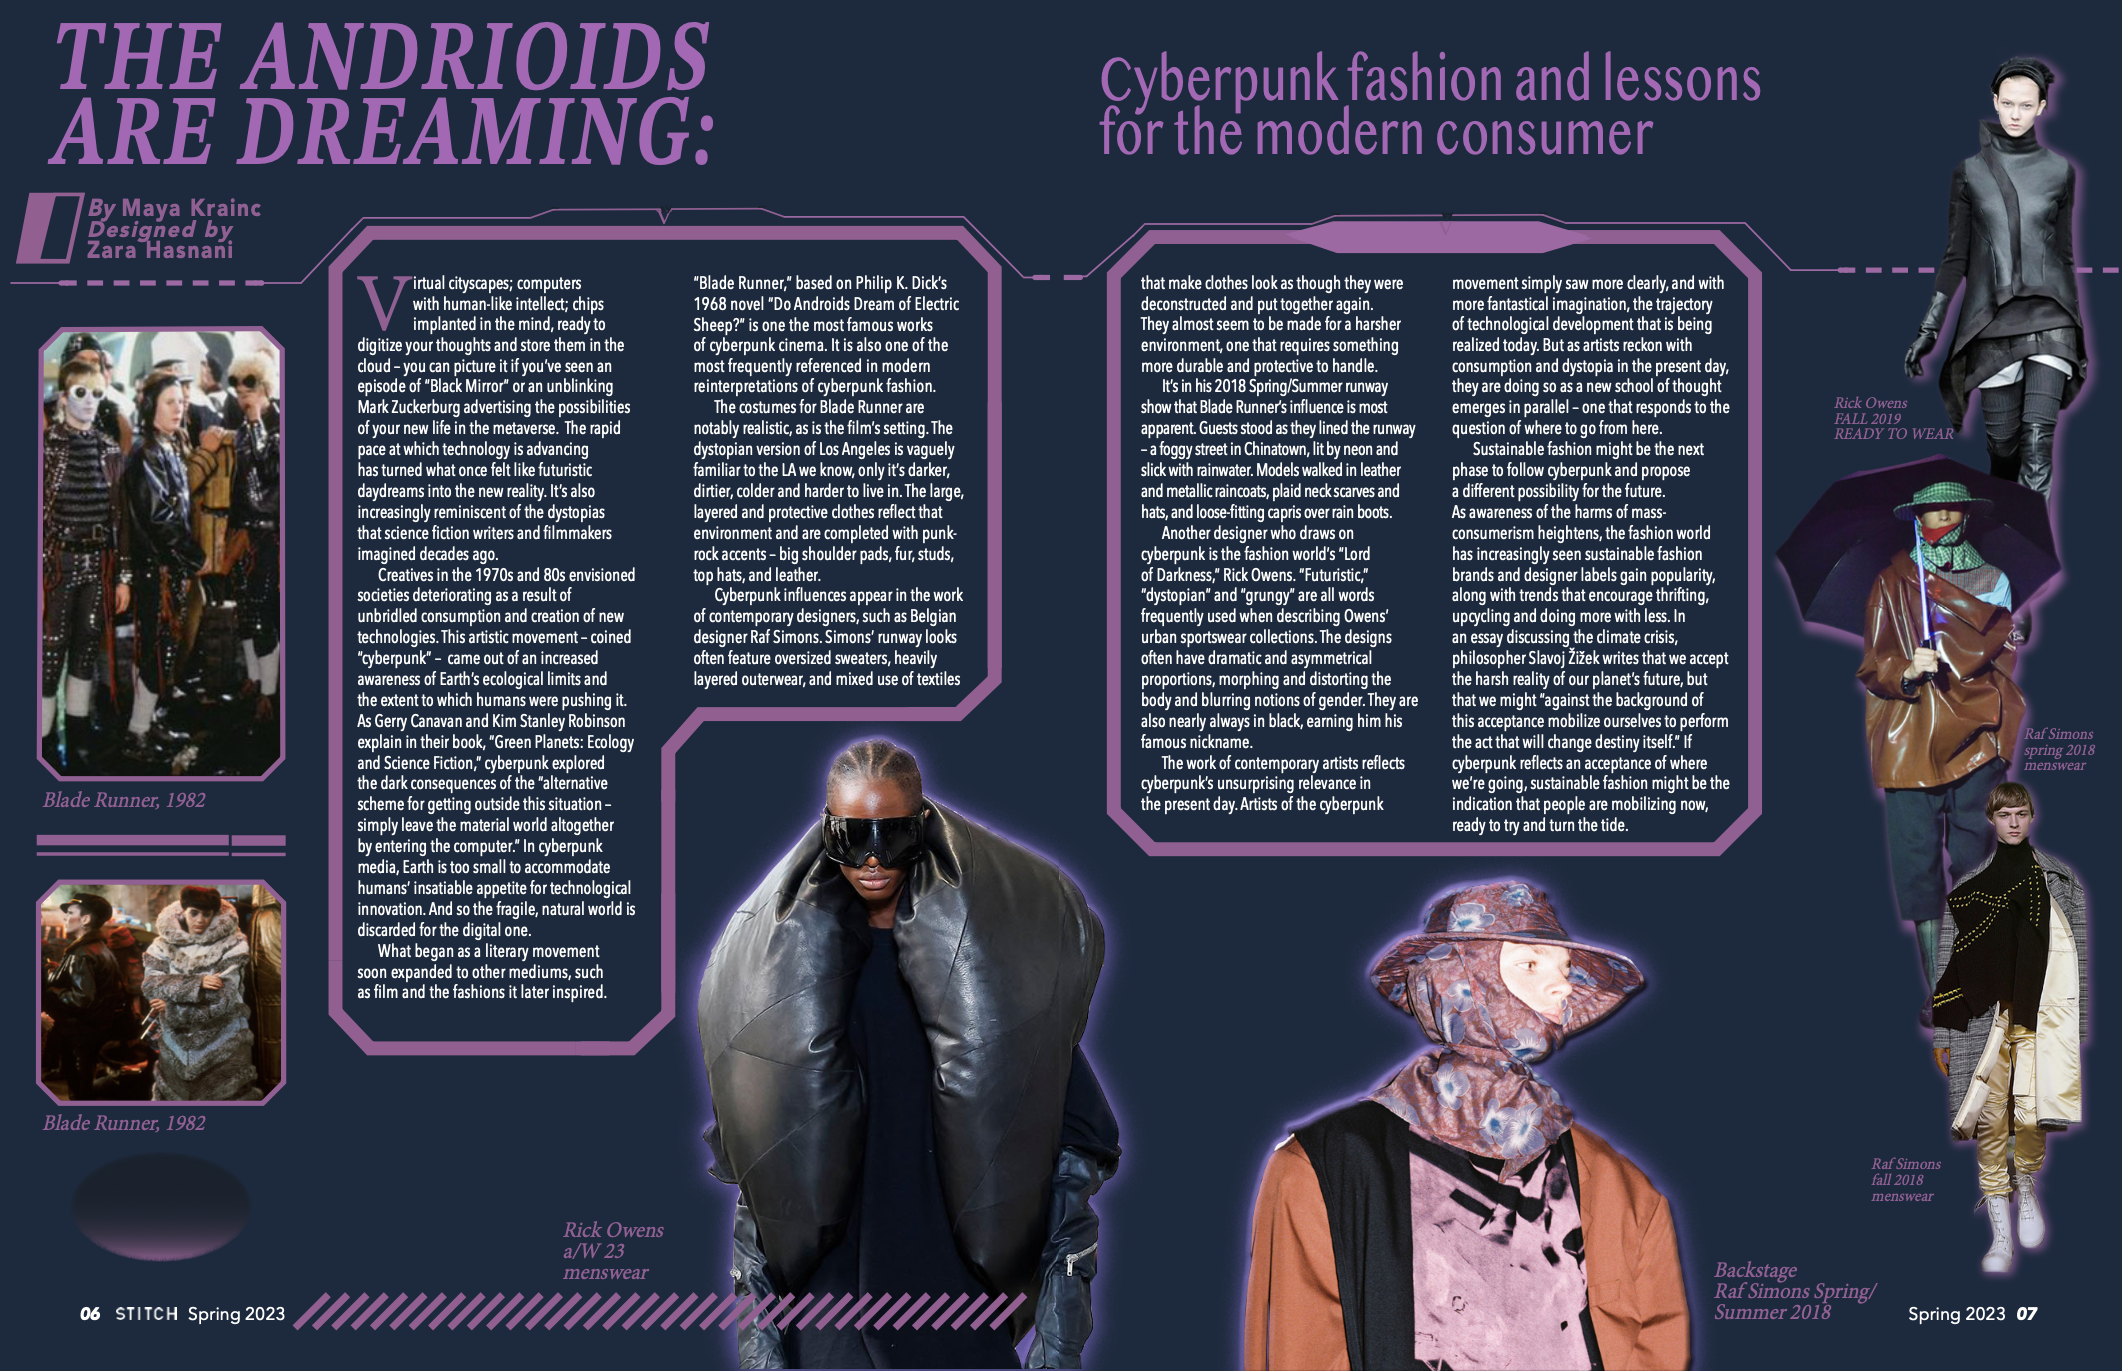 The Androids are Dreaming: Cyberpunk Fashion and Lessons For the